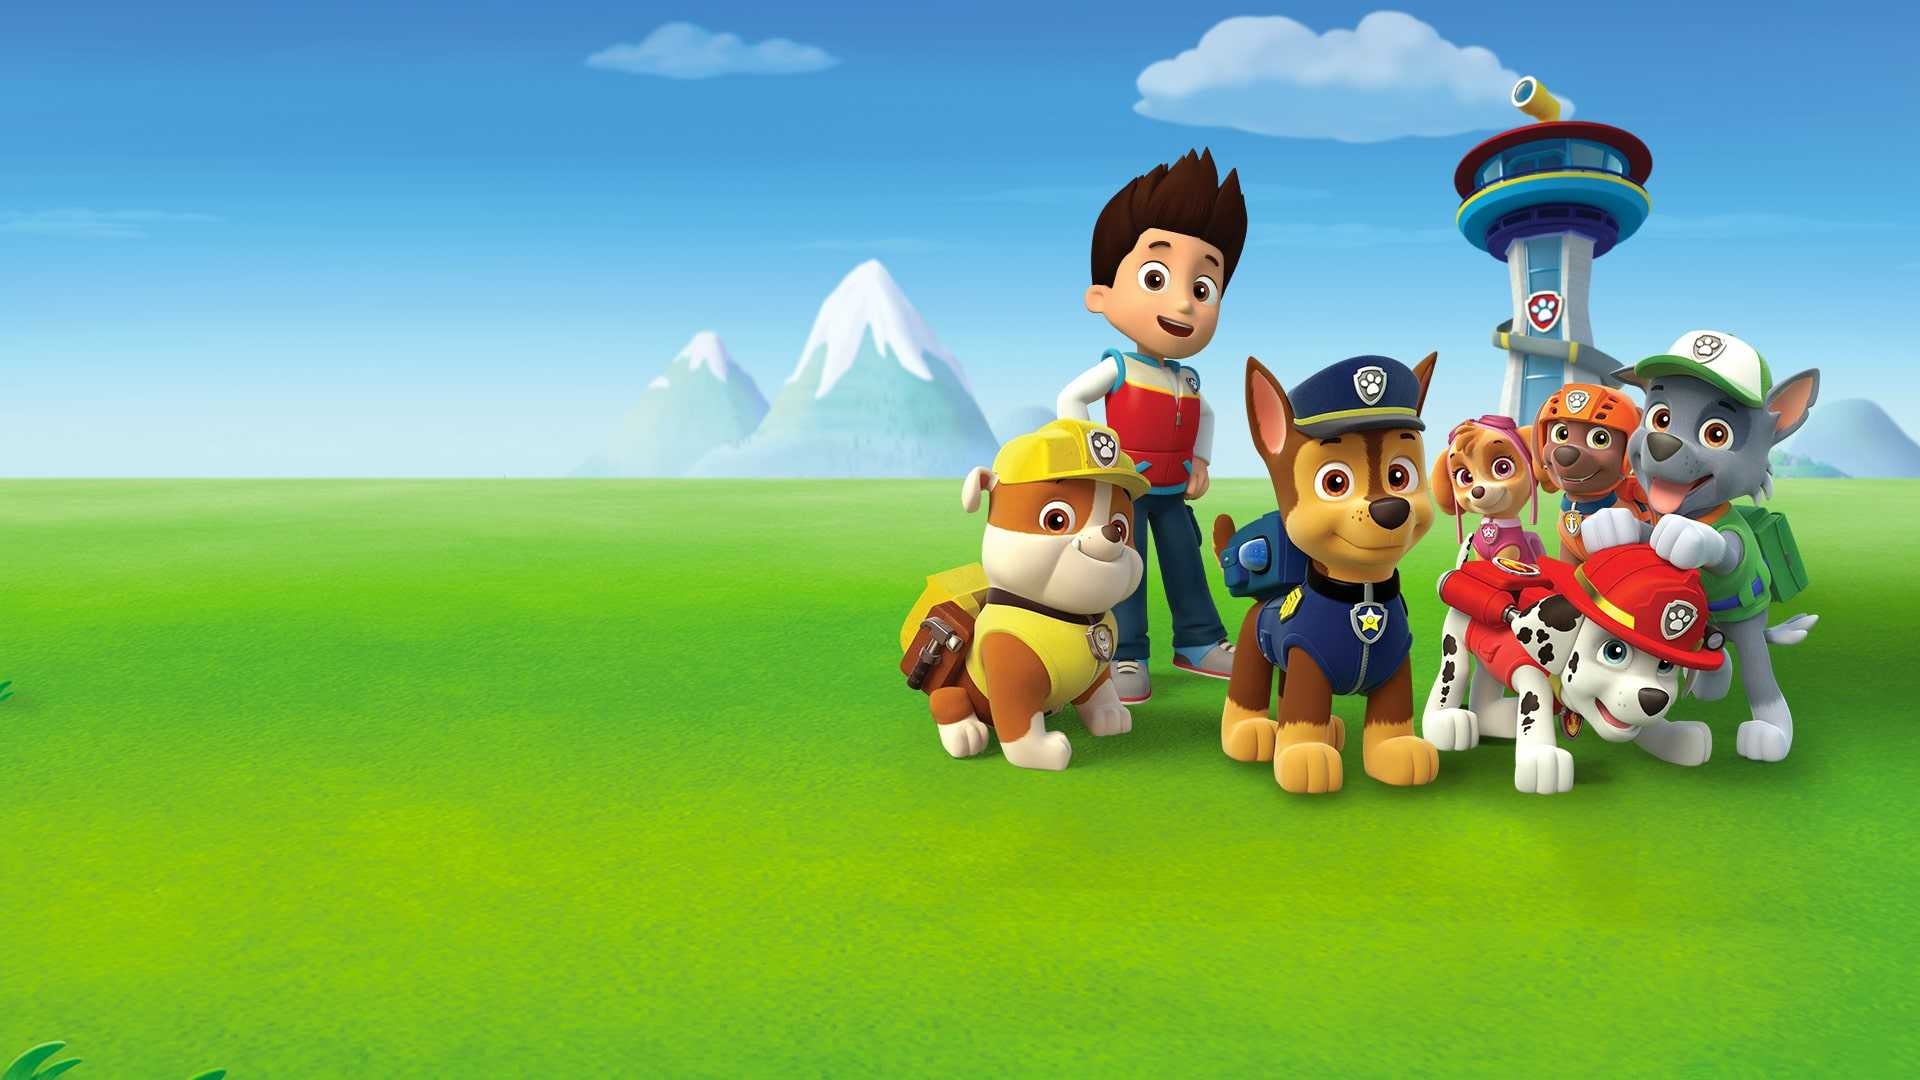 Paw Patrol wallpaper, Animated series, Canine squad, Adventure-filled, 1920x1080 Full HD Desktop